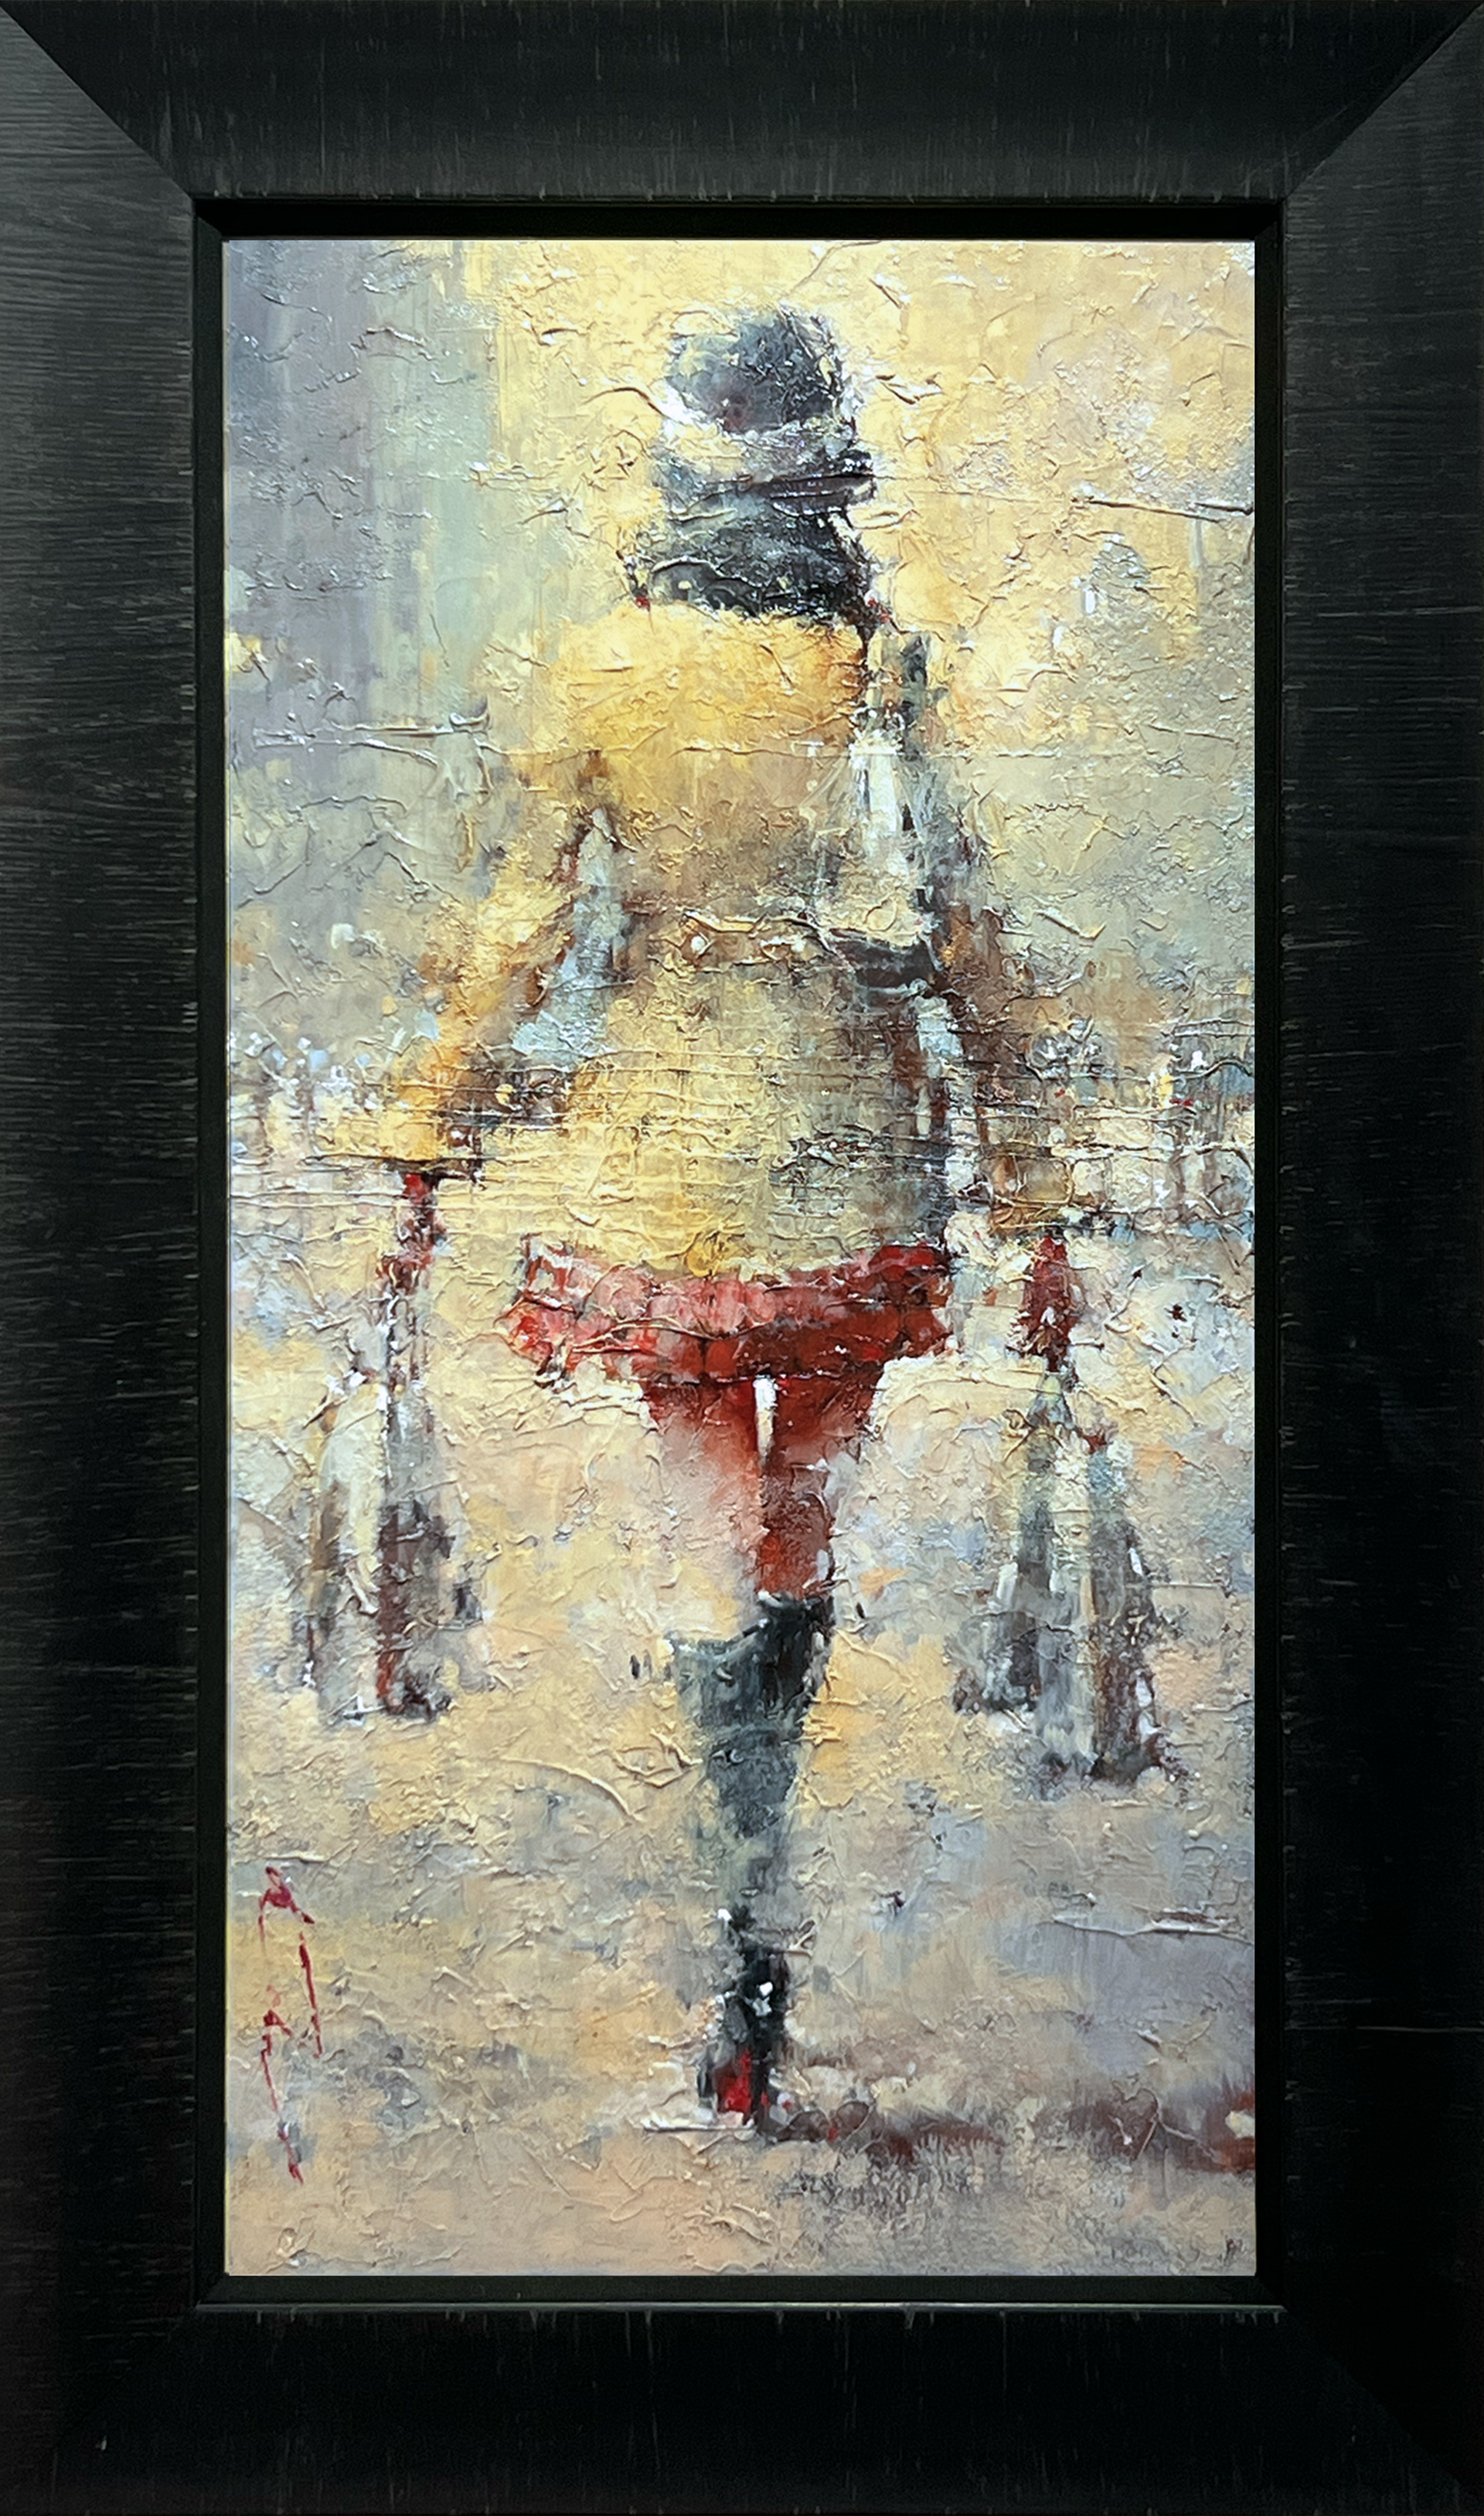 "On the Theme of Yellow" by Andre Kohn